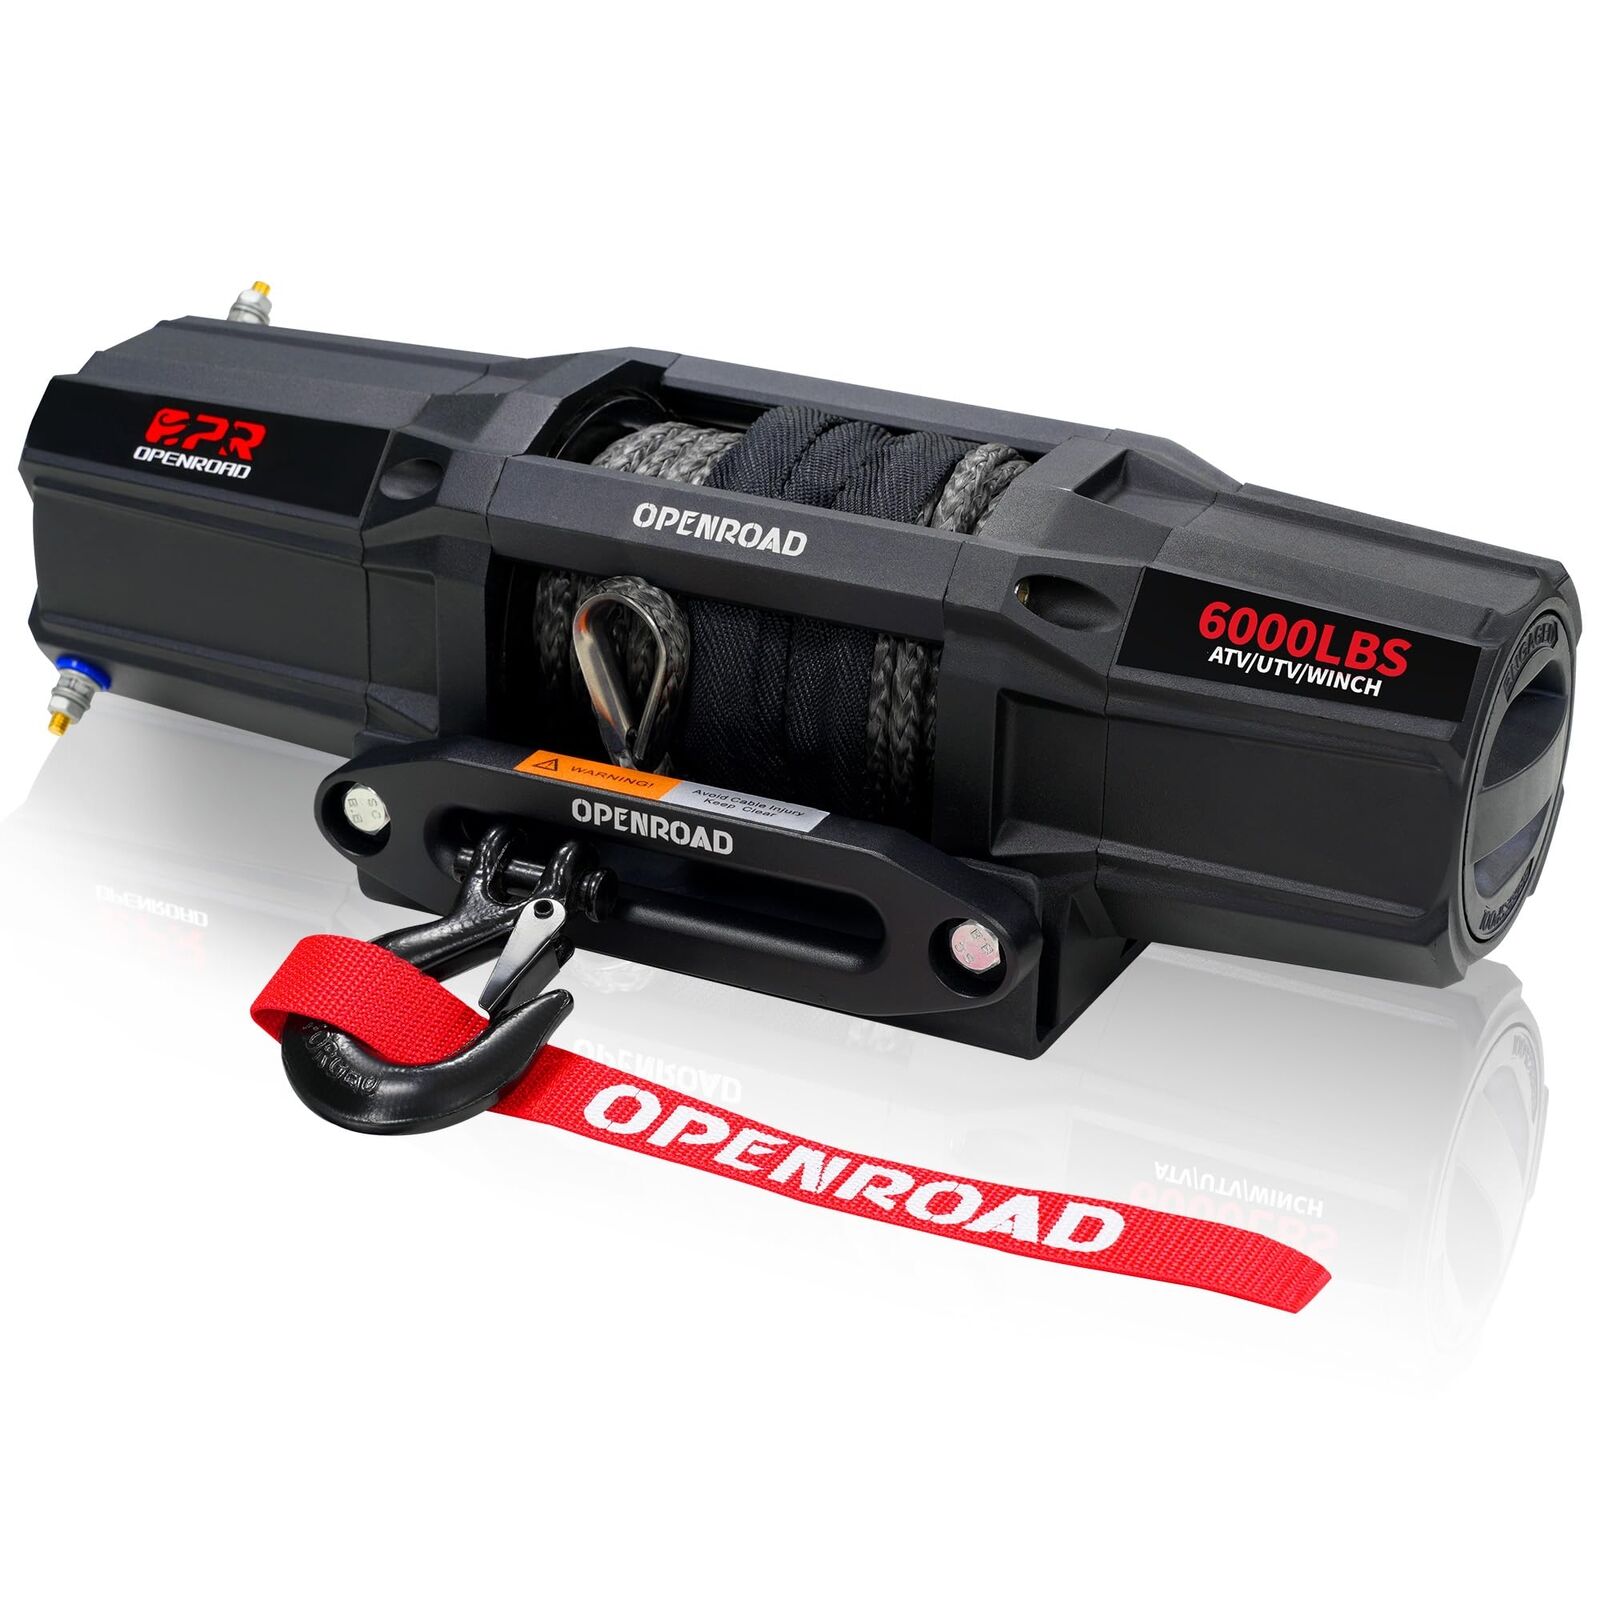 OPENROAD 6000 lbs ATV/UTV Winch,12 V Towing Off-Road Electric Winch.